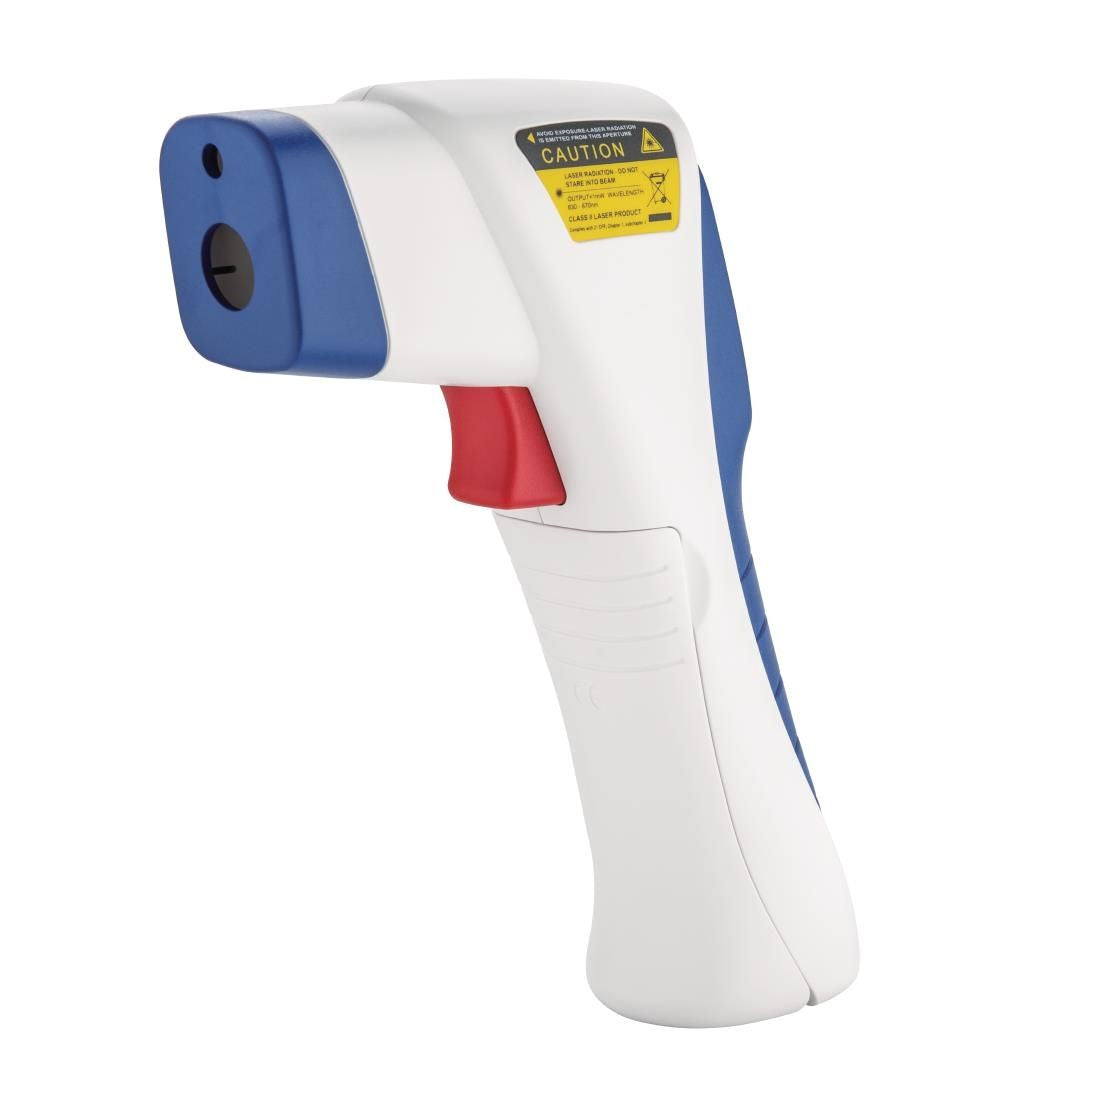 GG749 Hygiplas Infrared Thermometer JD Catering Equipment Solutions Ltd